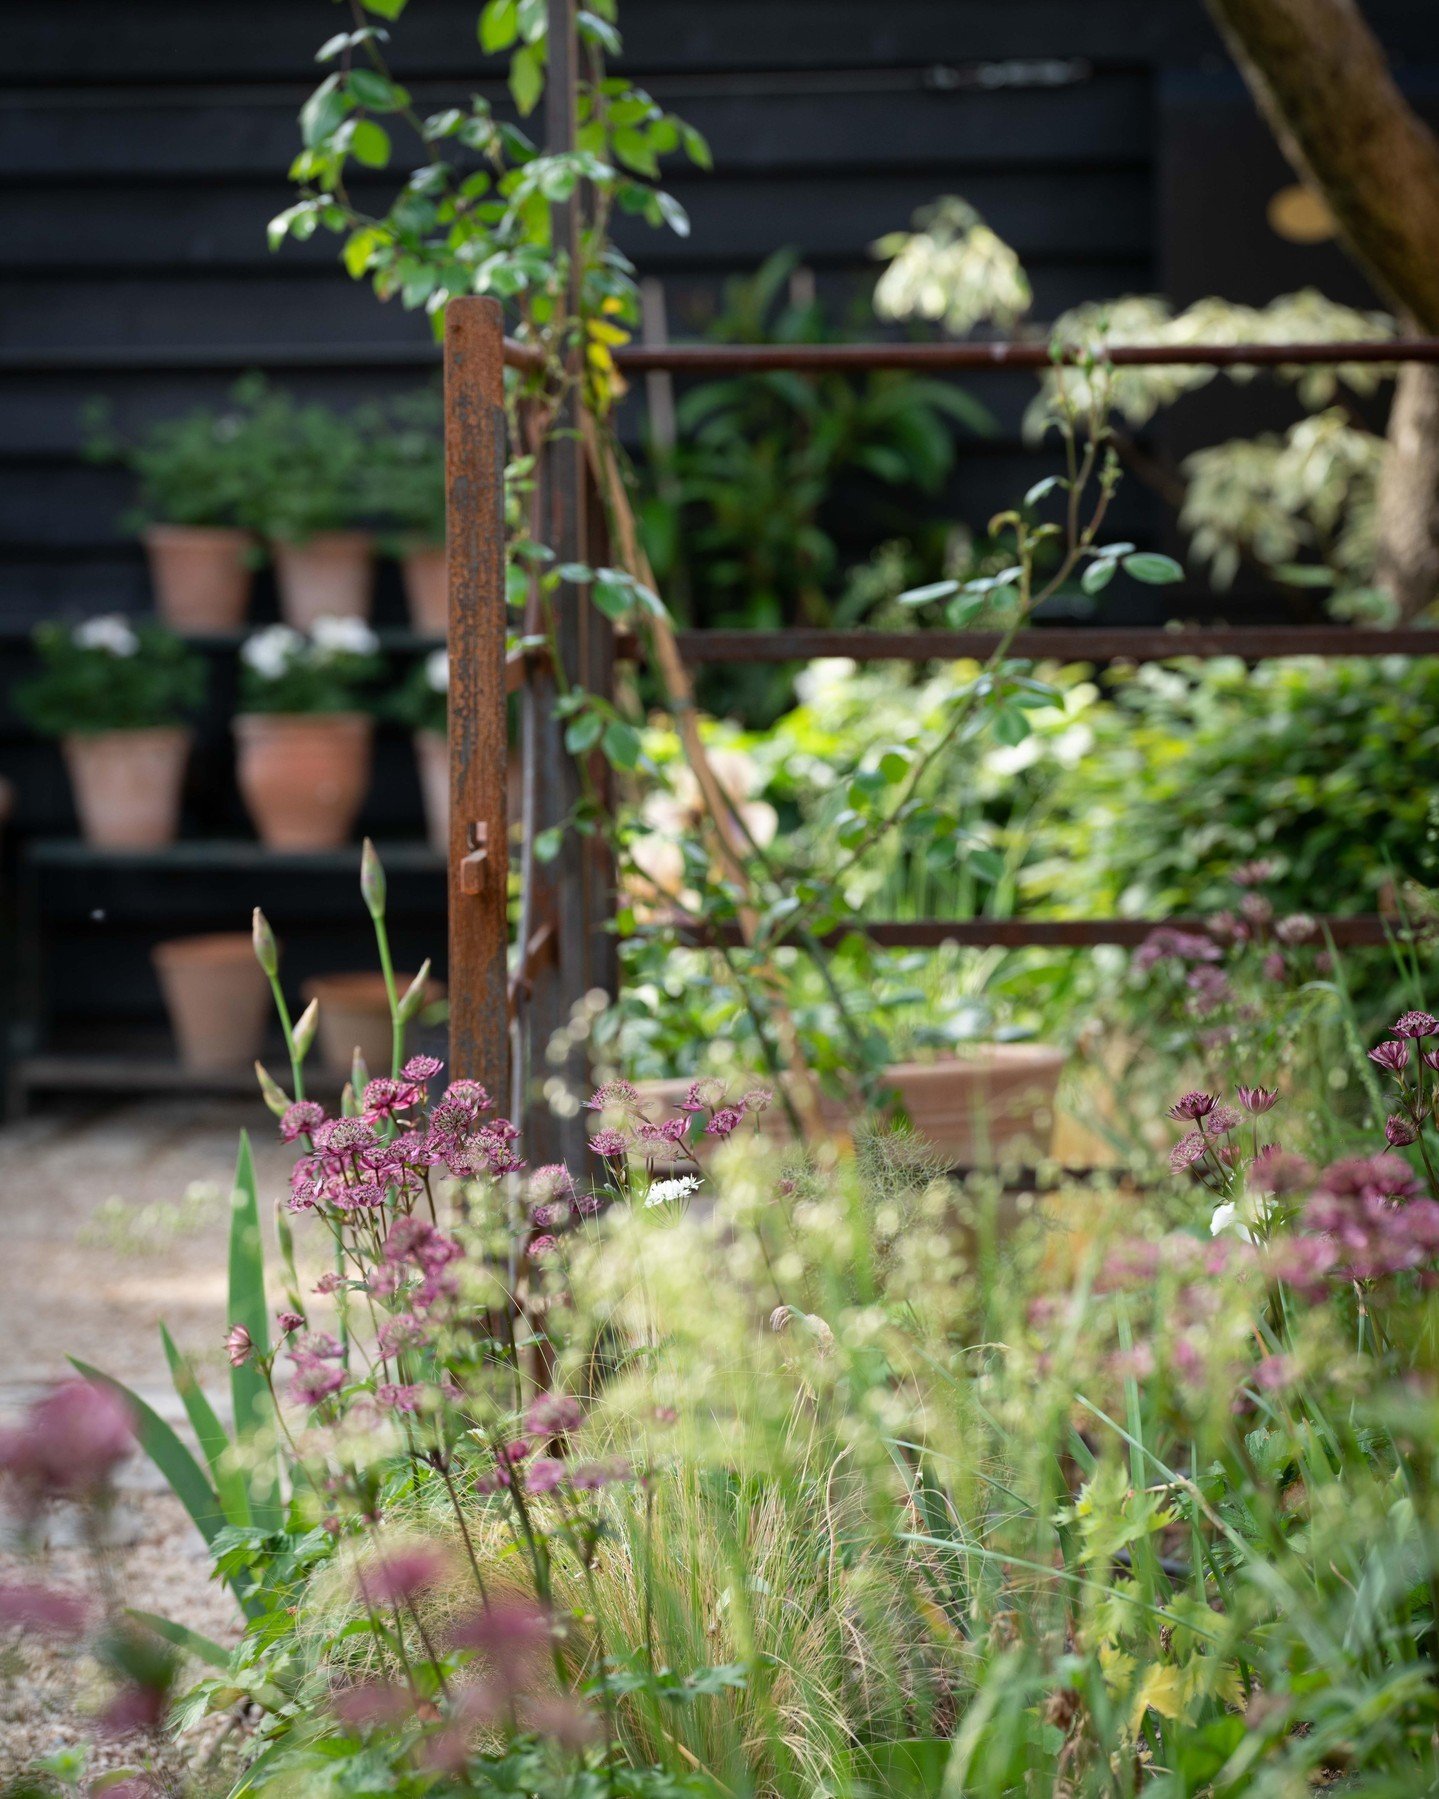 A quiet corner of a romantic city garden we made last winter. Bold steel features contrast with the delicate, ephemeral planting of Astrantia, Iris, Fennel, Stipa &amp; pale pink Roses about to burst into flower. May is such an exciting time in the g